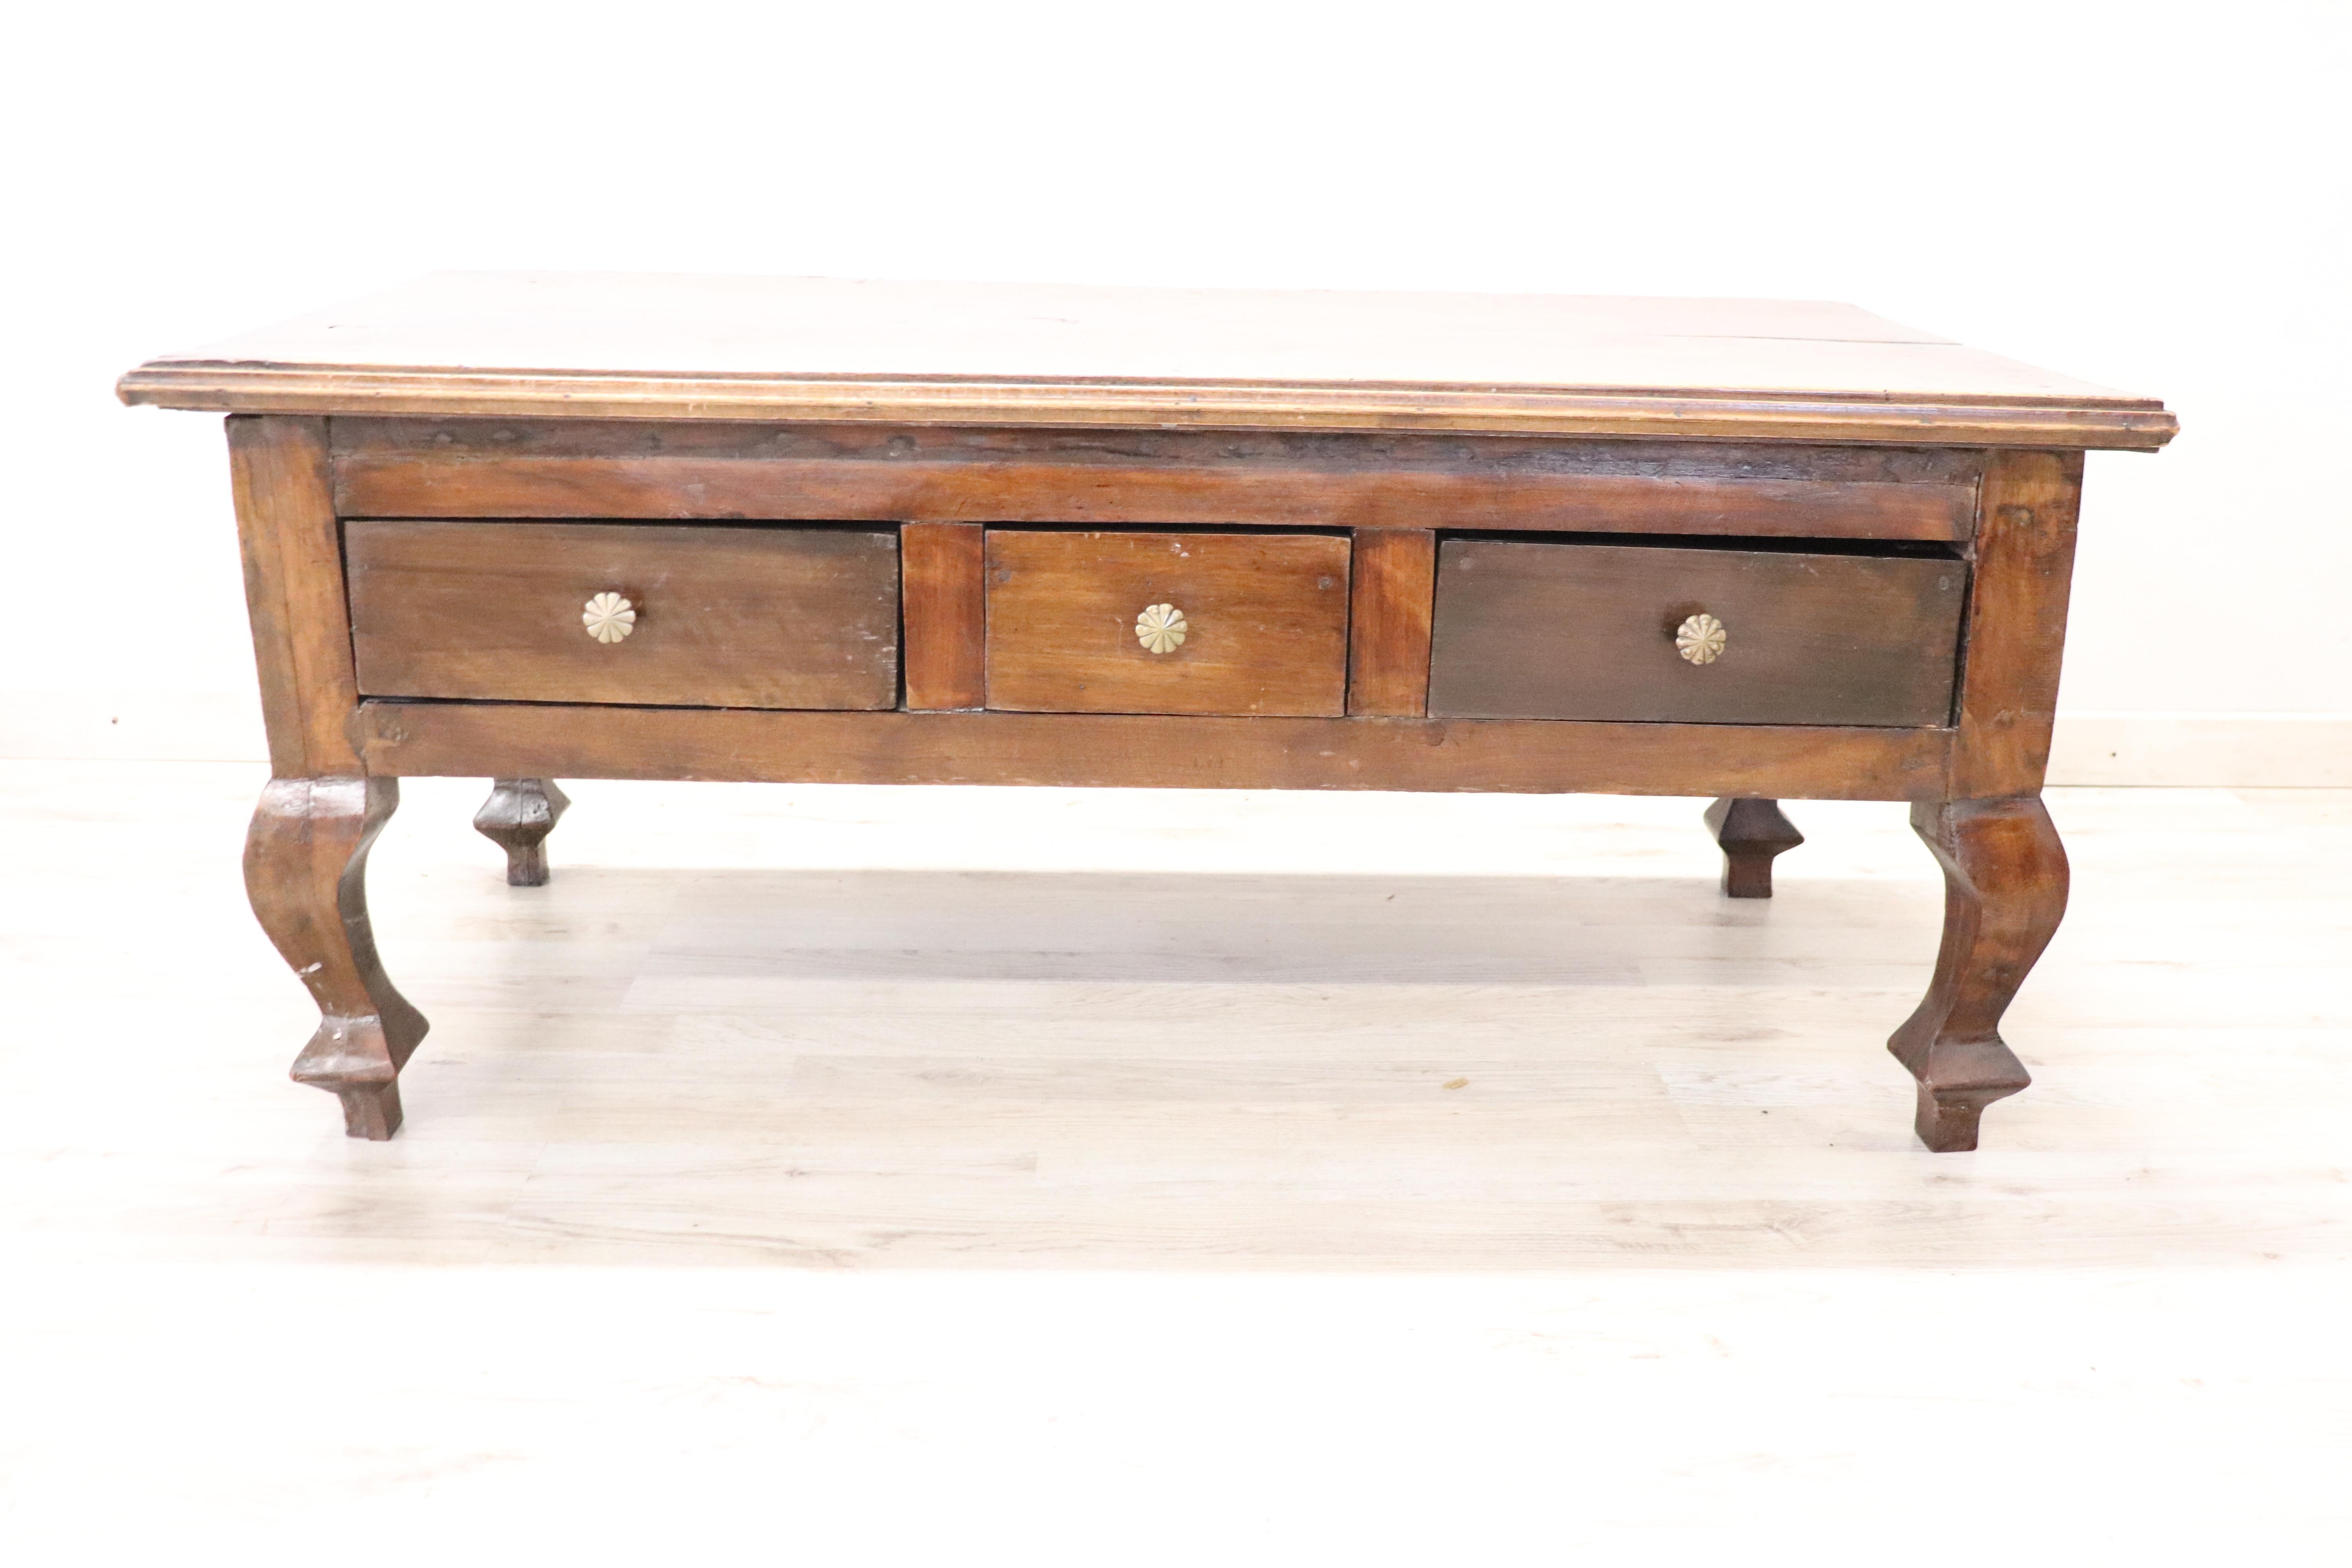 Rare and fine quality 1930s rectangular sofa table or coffee table. The table in precious solid walnut wood with delicious wavy legs. on the front three comfortable drawers. The sofa table have been used need of restoration as you can see from the